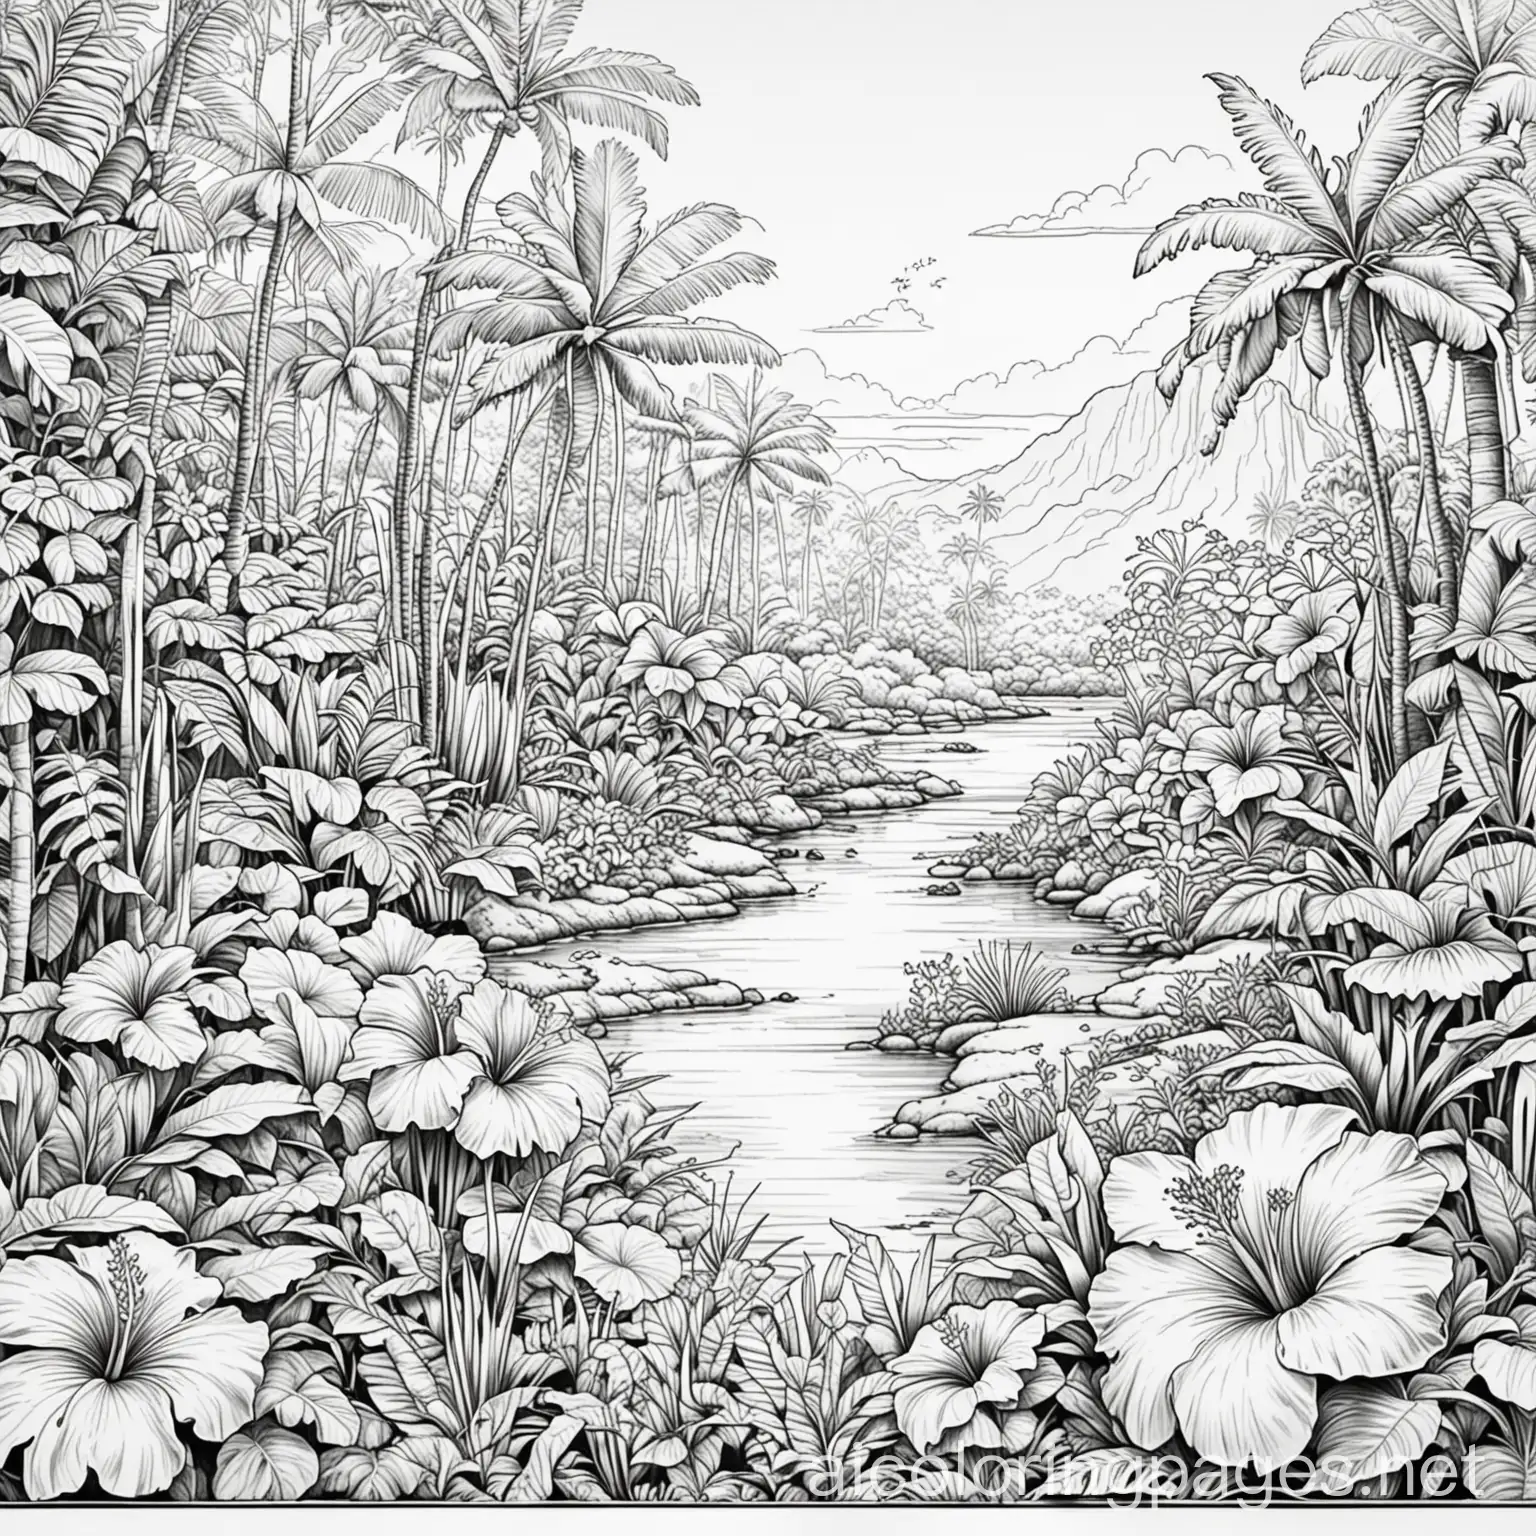 hawaiian garden, Coloring Page, black and white, line art, white background, Simplicity, Ample White Space. The background of the coloring page is plain white to make it easy for young children to color within the lines. The outlines of all the subjects are easy to distinguish, making it simple for kids to color without too much difficulty